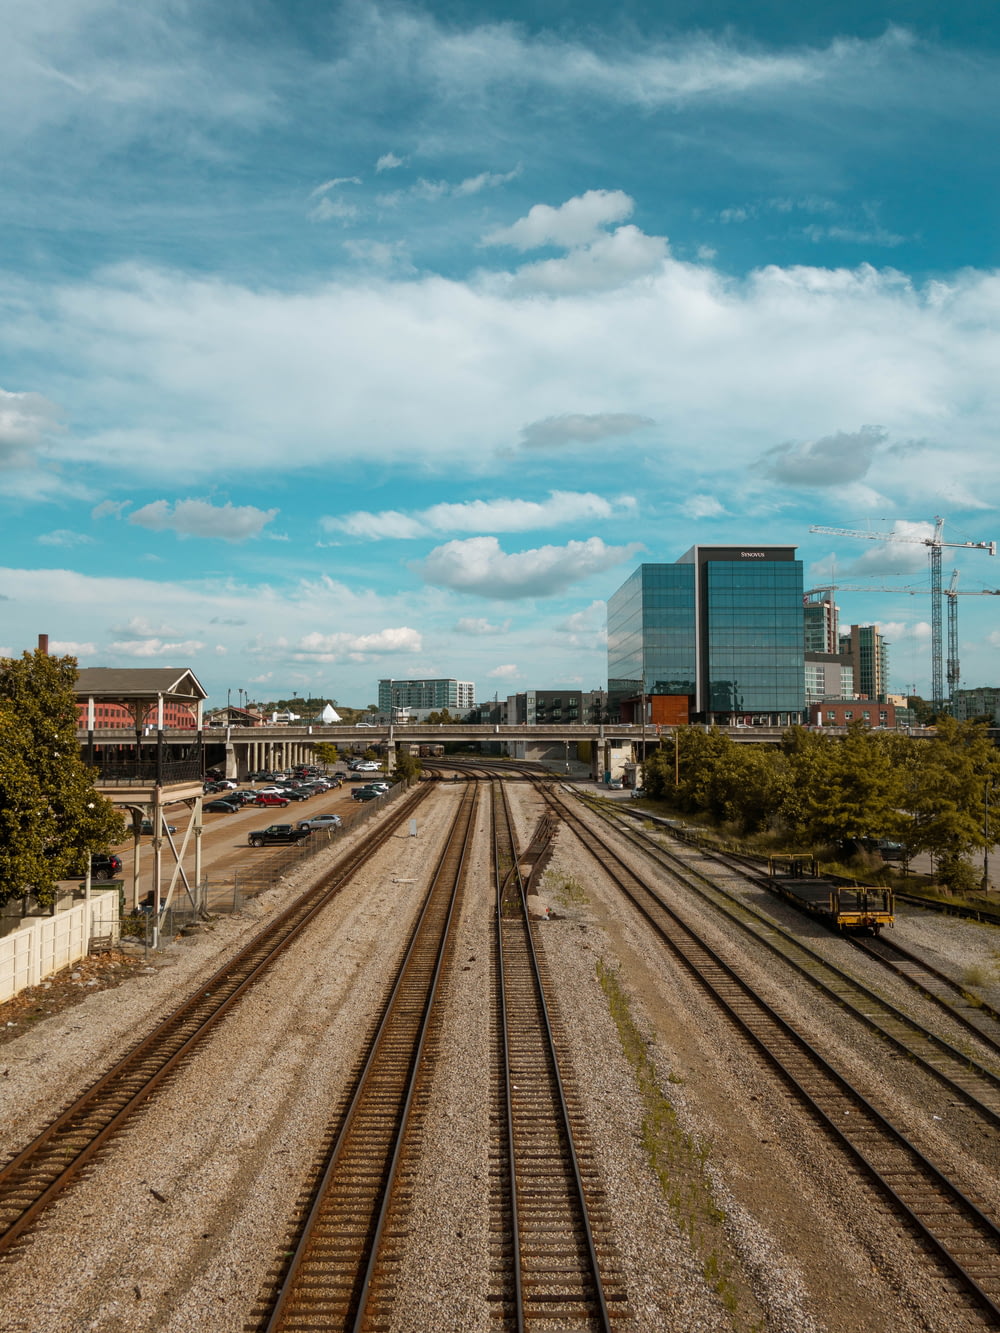 a view of a train track with buildings in the background